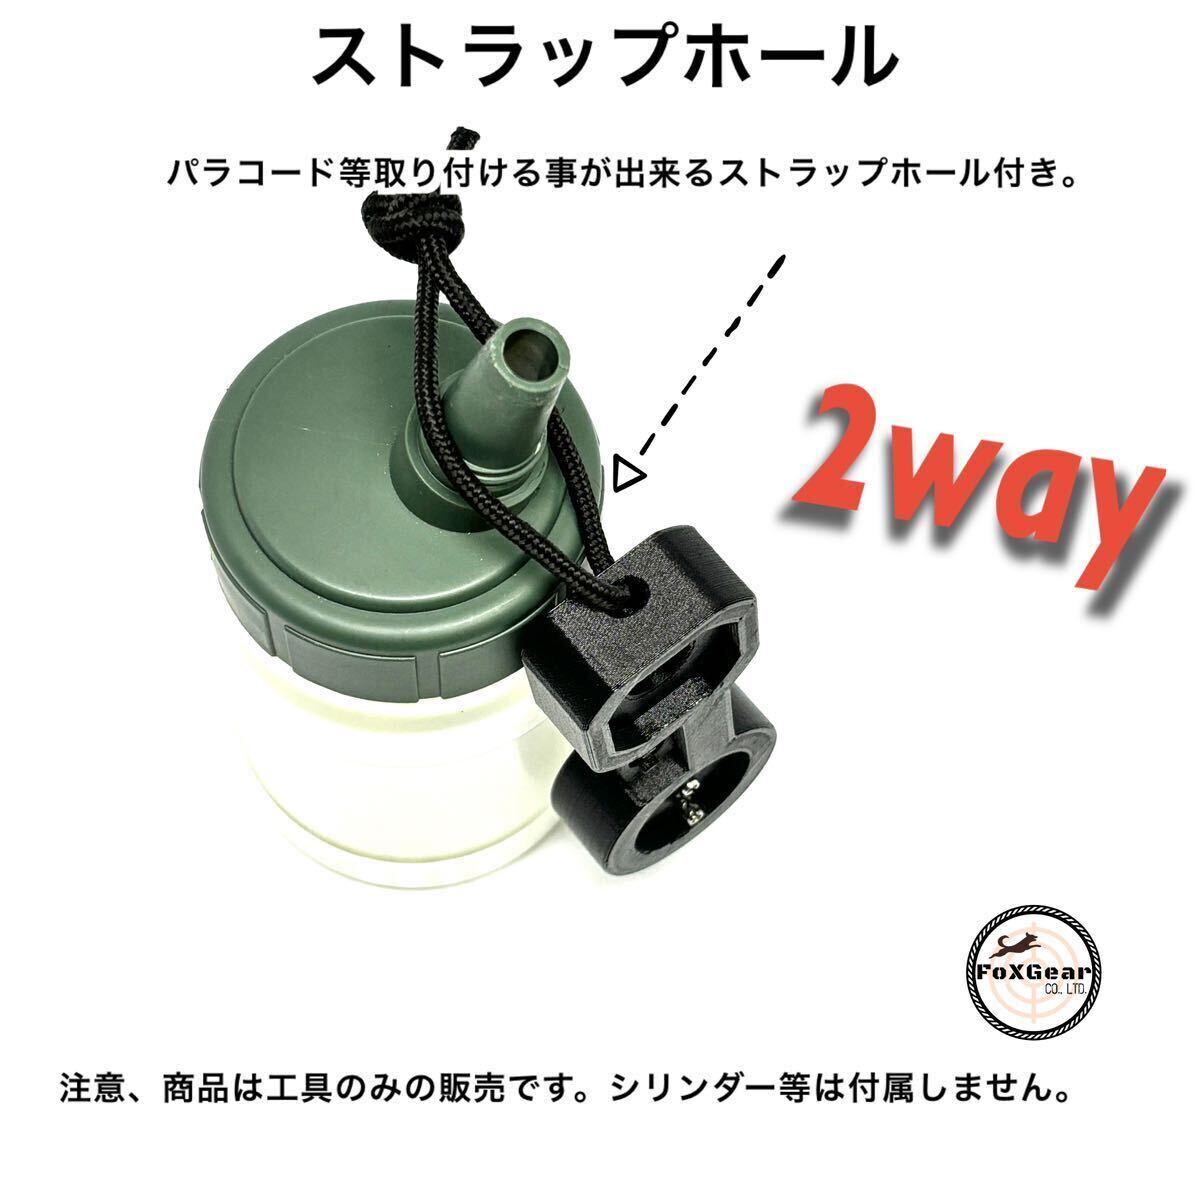 toreponPTW magazine . pulling out + cylinder disassembly tool 2 position training wepon Infinity cylinder maintenance 